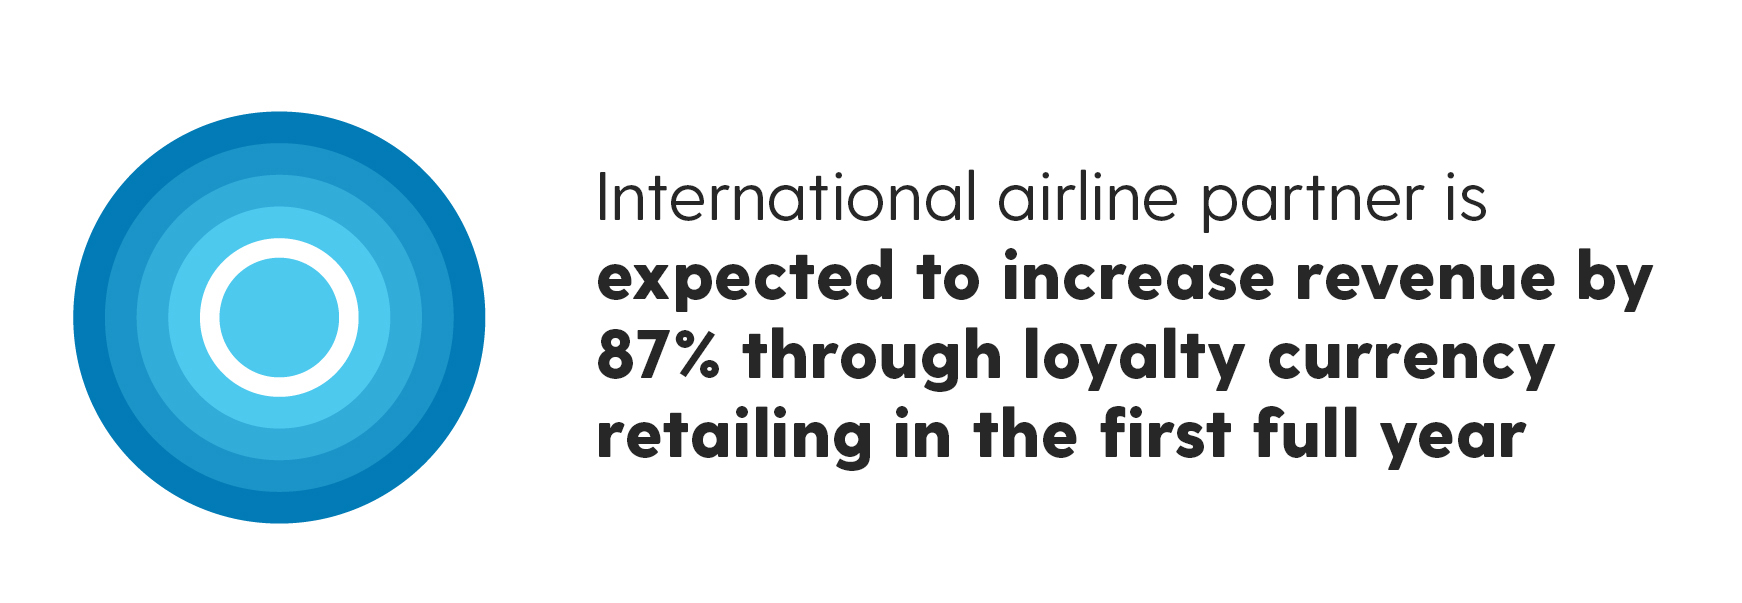 International airline partner is expected to increase revenue by 87% through loyalty currency retailing in the first full year.